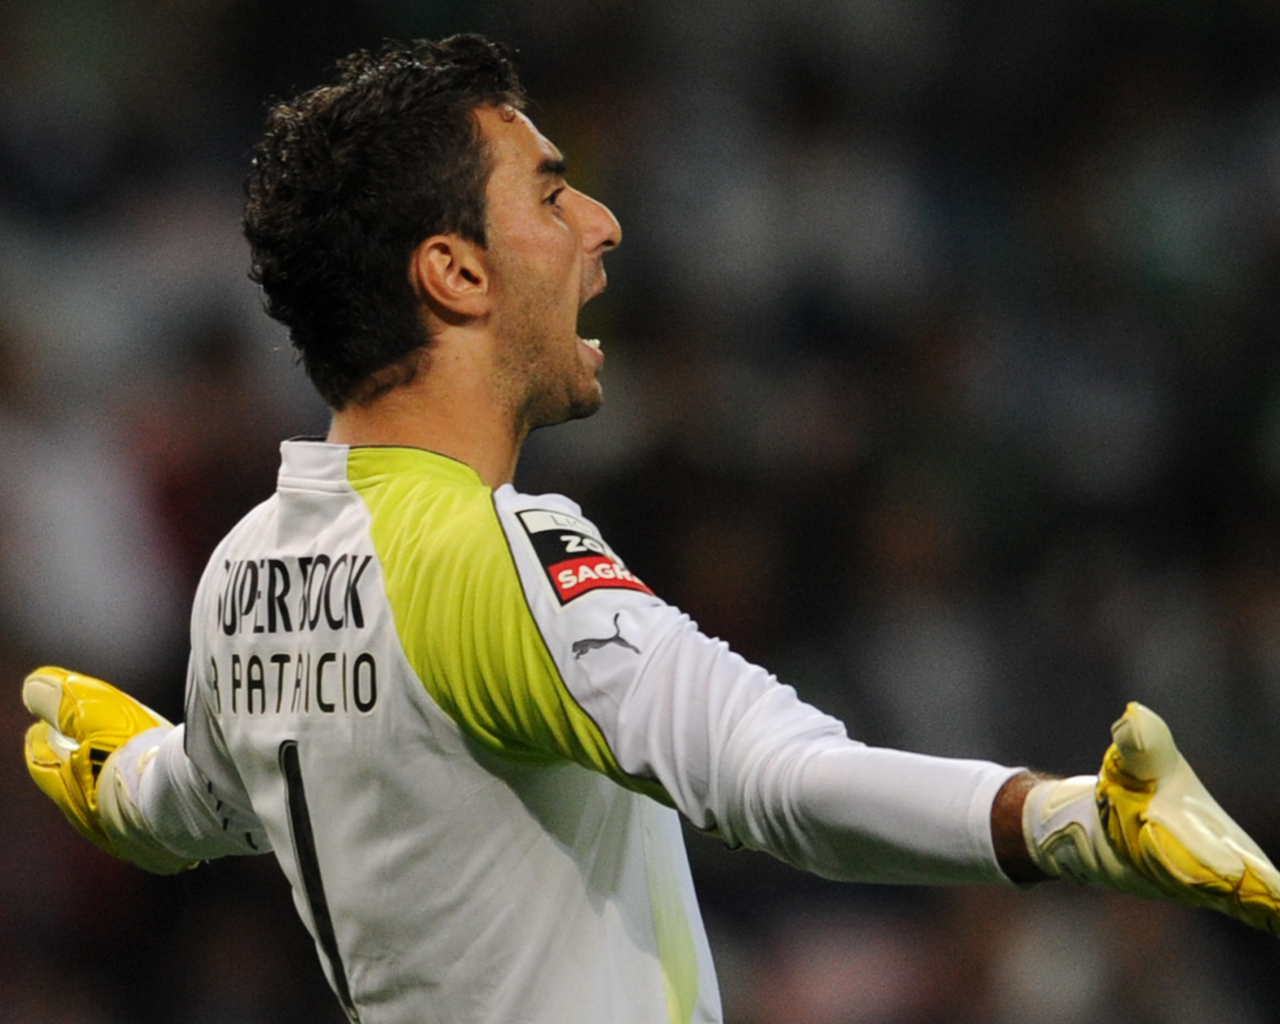 The best football player of Sporting Rui Patricio